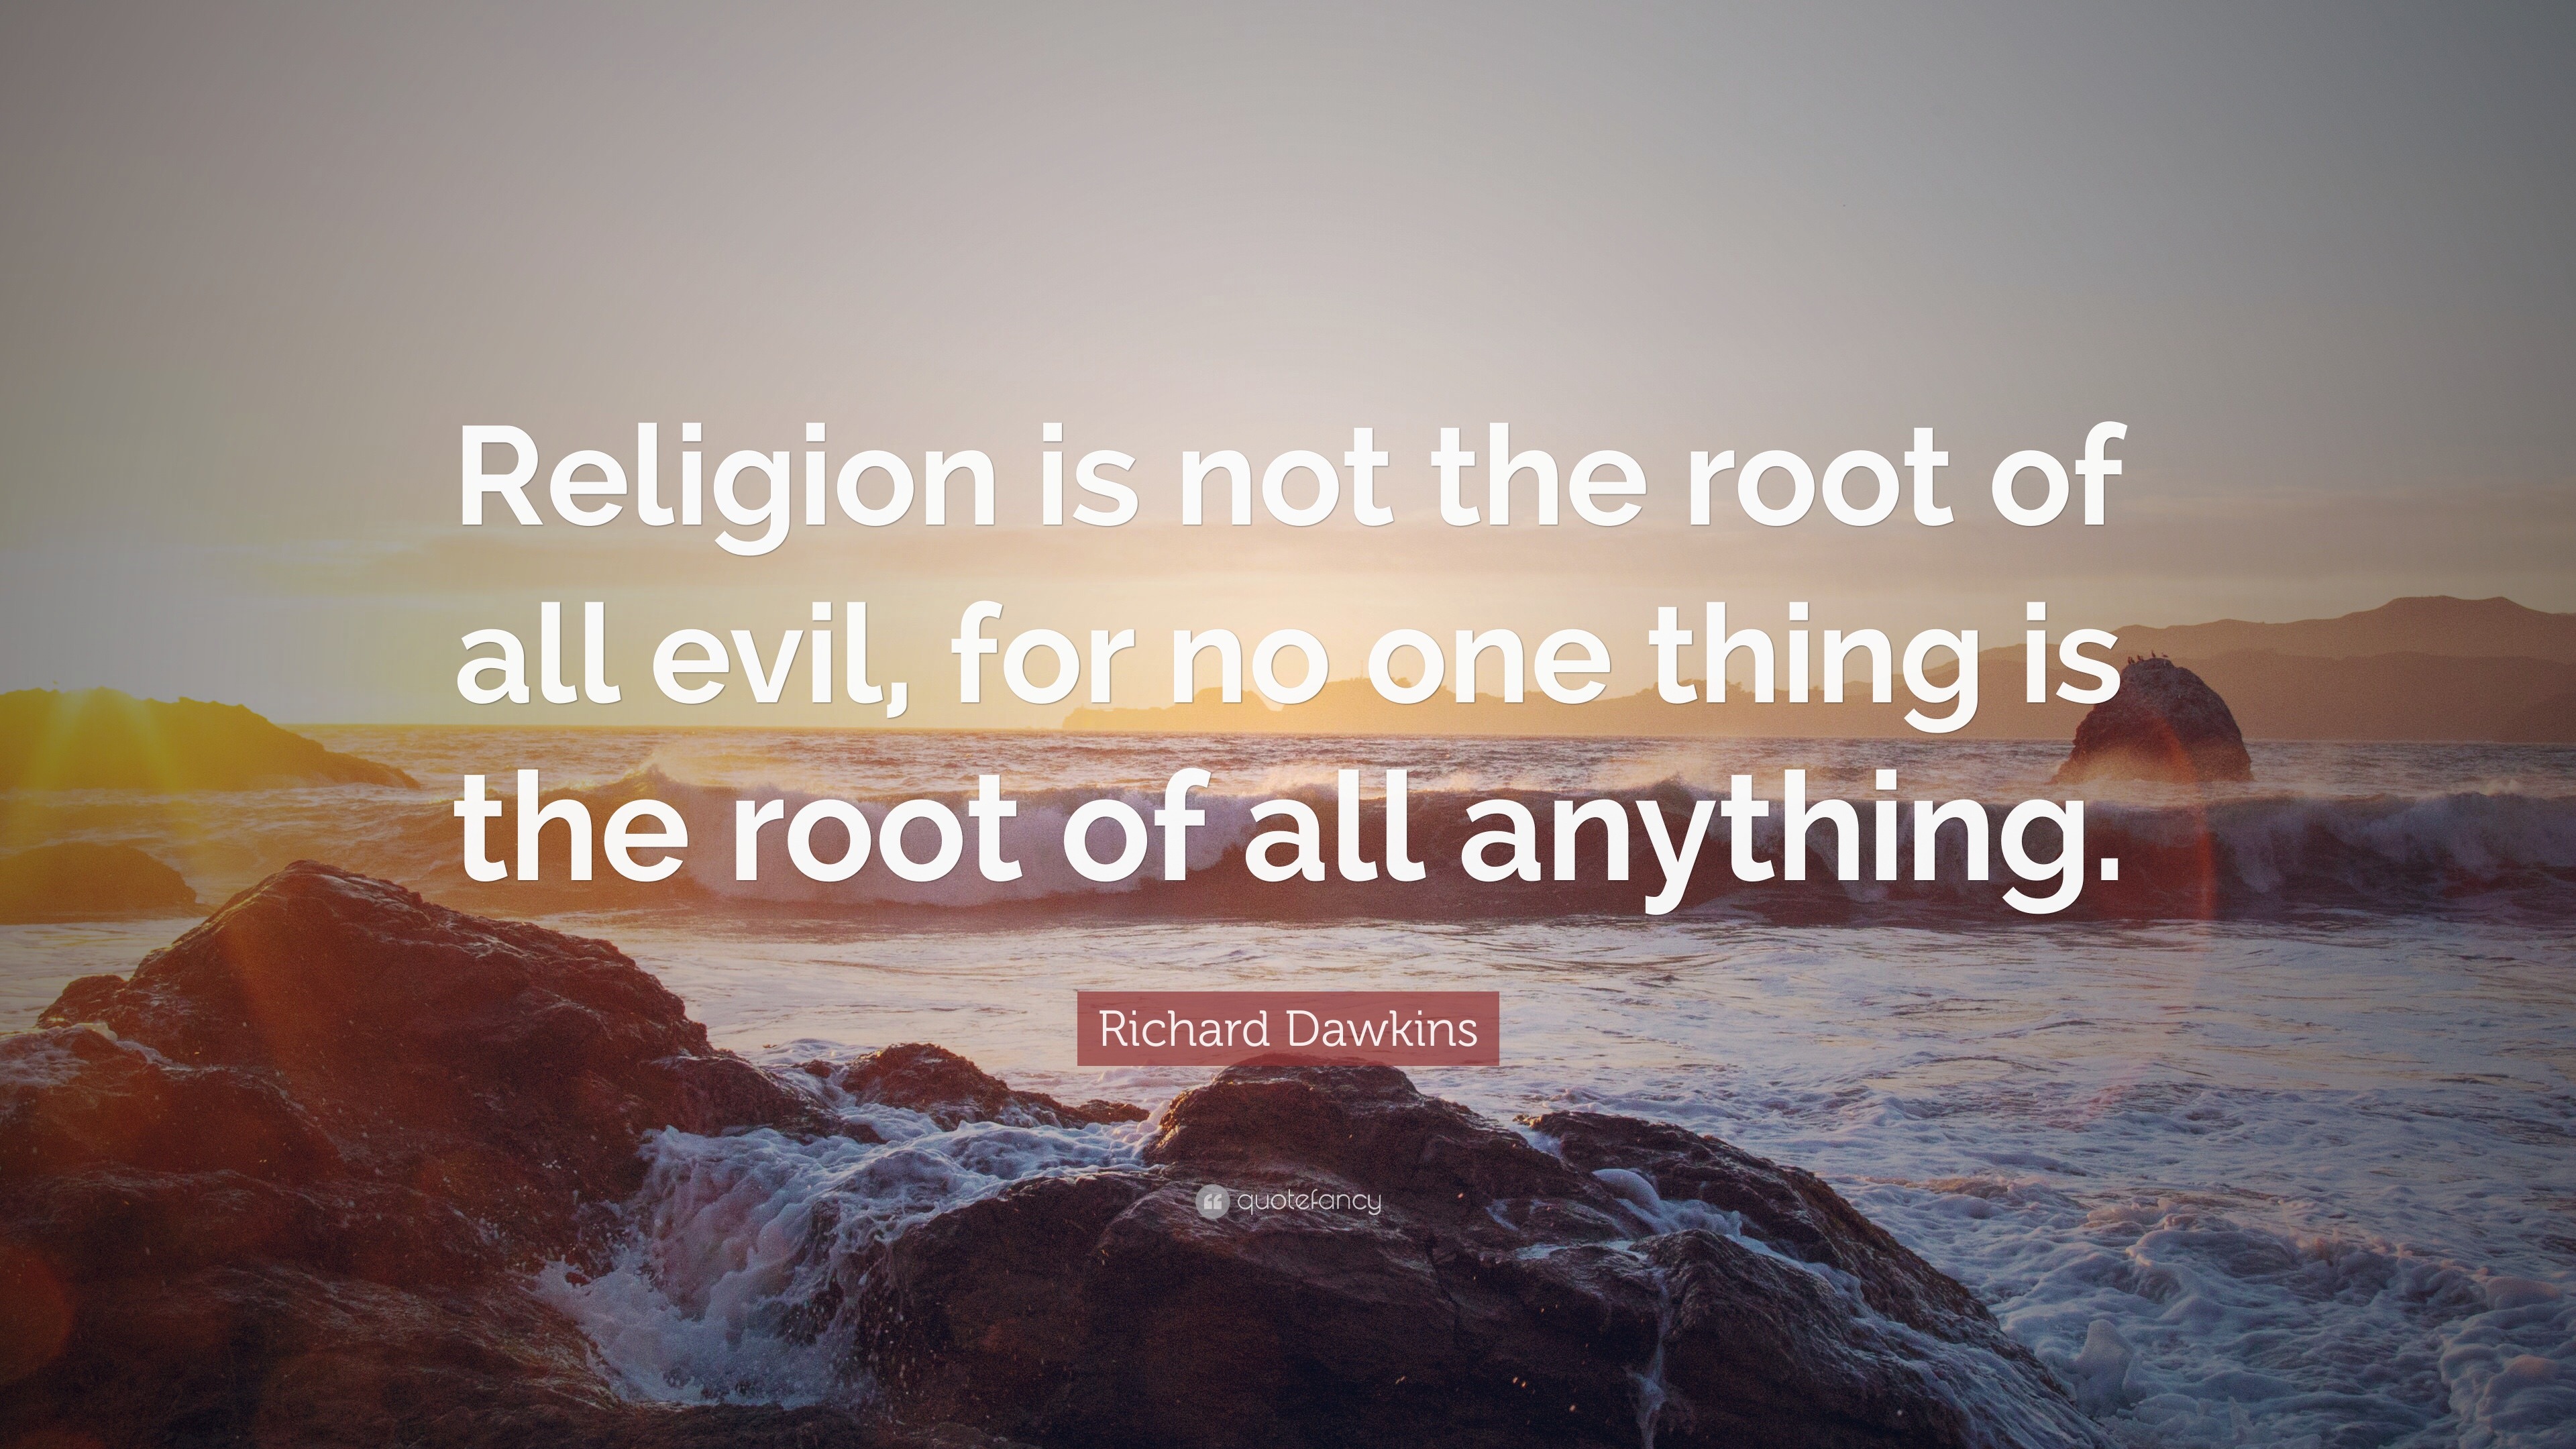 Richard Dawkins Quote: “Religion is not the root of all evil, for no ...